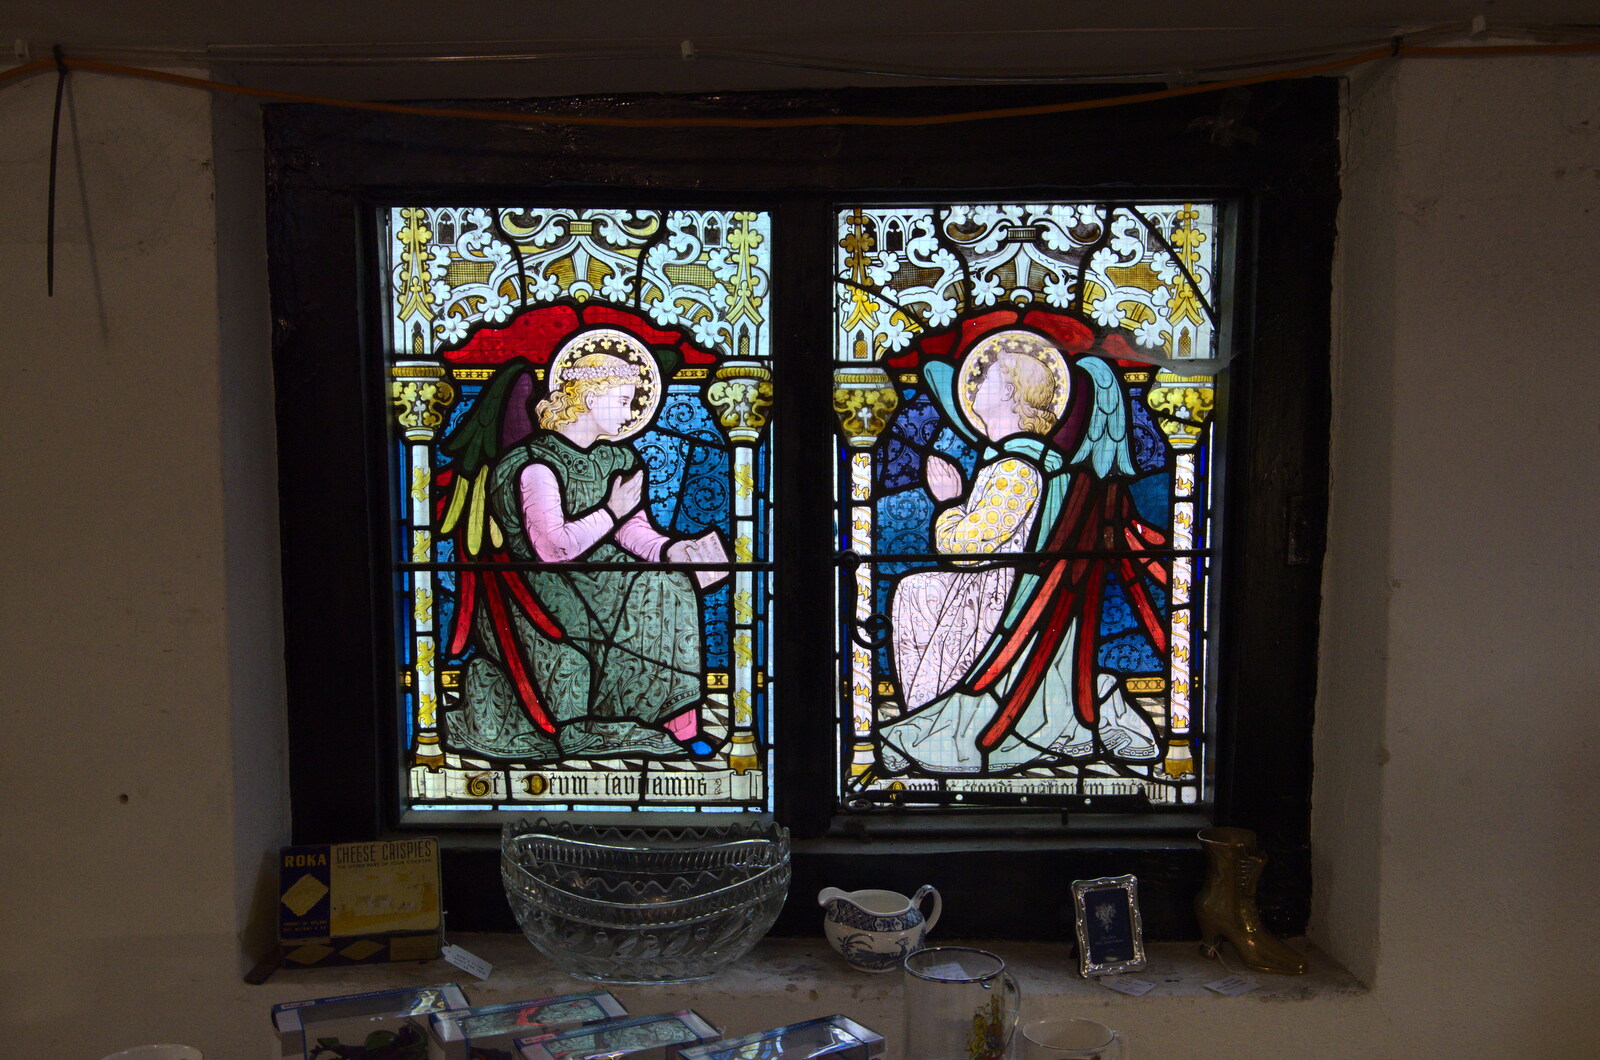 Some nice older stained-glass windows from A Trip to Cooke's Music, St. Benedict's Street, Norwich - 14th March 2020